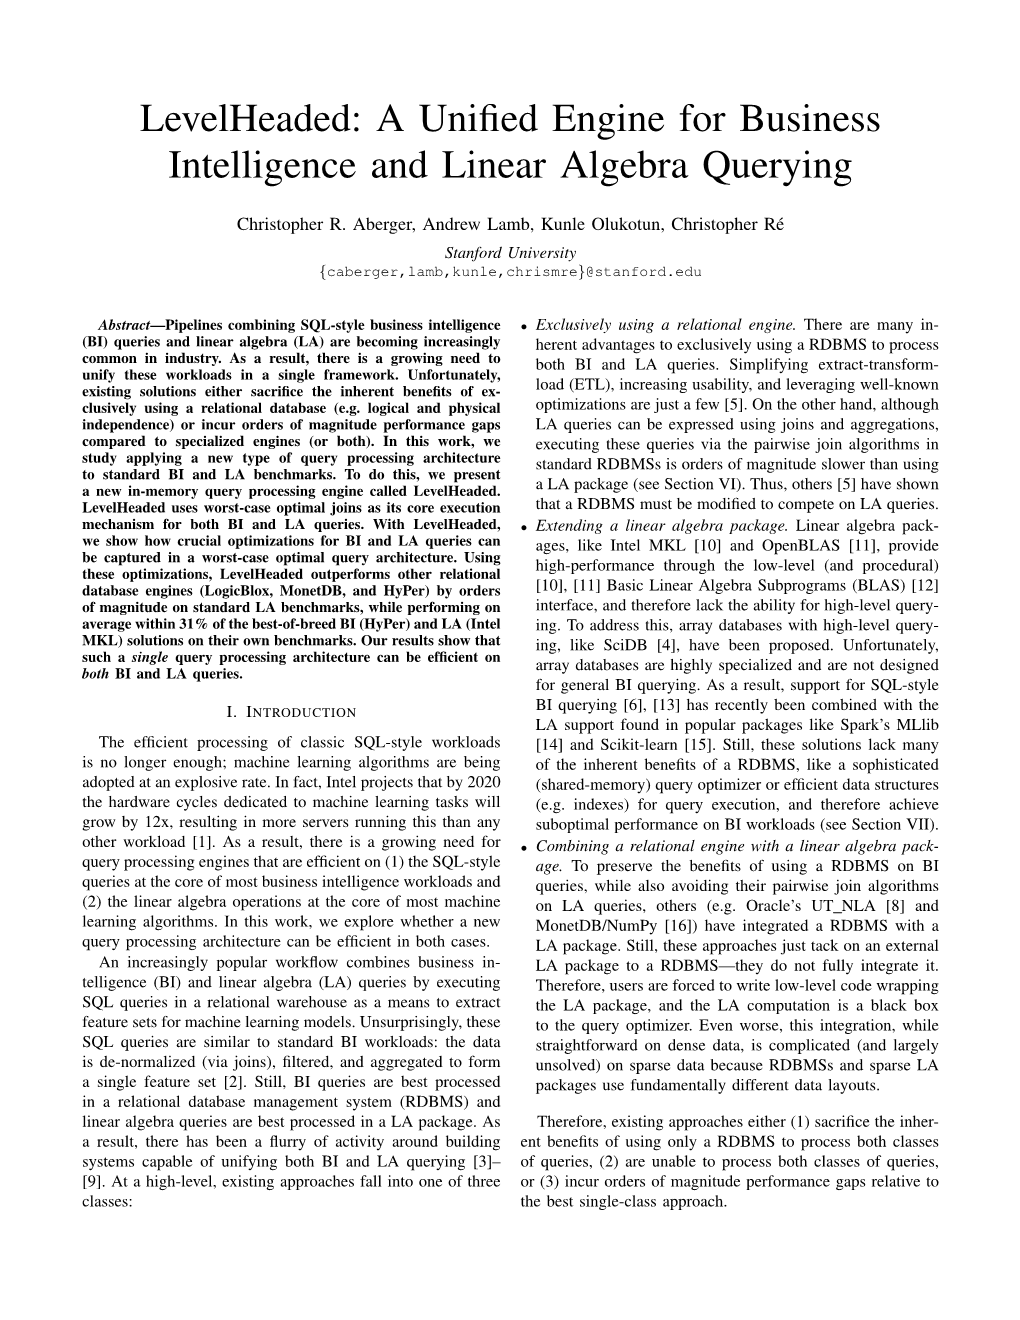 A Unified Engine for Business Intelligence and Linear Algebra